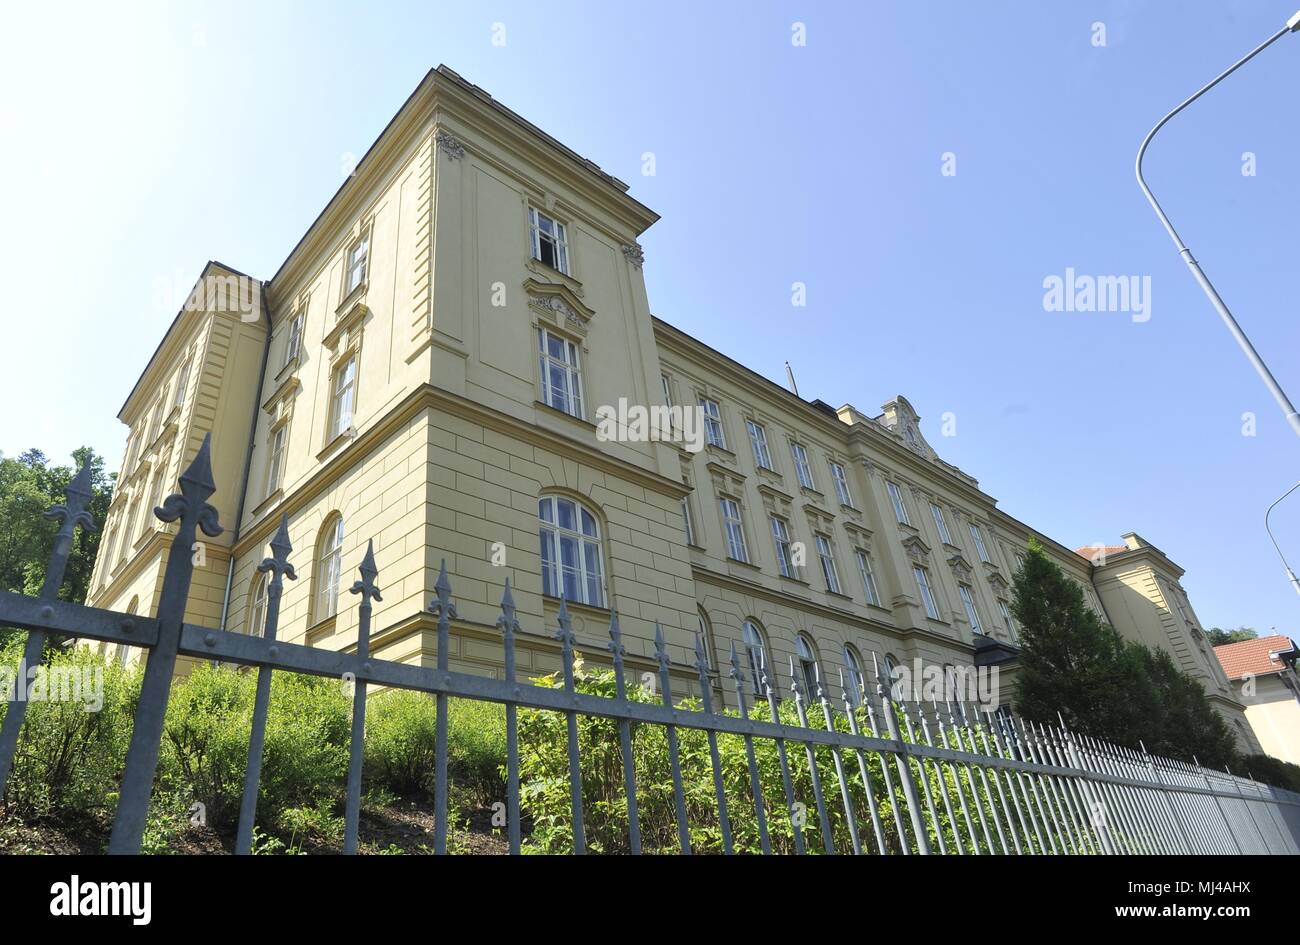 The seat of Czech Republic's Military Research Institute, state enterprise, is seen in Brno, Czech Republic, on May 4, 2018. The Novichok nerve agent, which was behind the poisoning of former double agent Sergei Skripal and his daughter in Salisbury, was in a small quantity produced and tested in Czech Republic, then it was destroyed, President Milos Zeman said on May 4, 2018. Zeman said his information was based on a report drafted by the Military Counter-intelligence (MZ), saying that the agent denoted as A230, produced for testing purposes by the Military Research Institute in Brno, was Nov Stock Photo